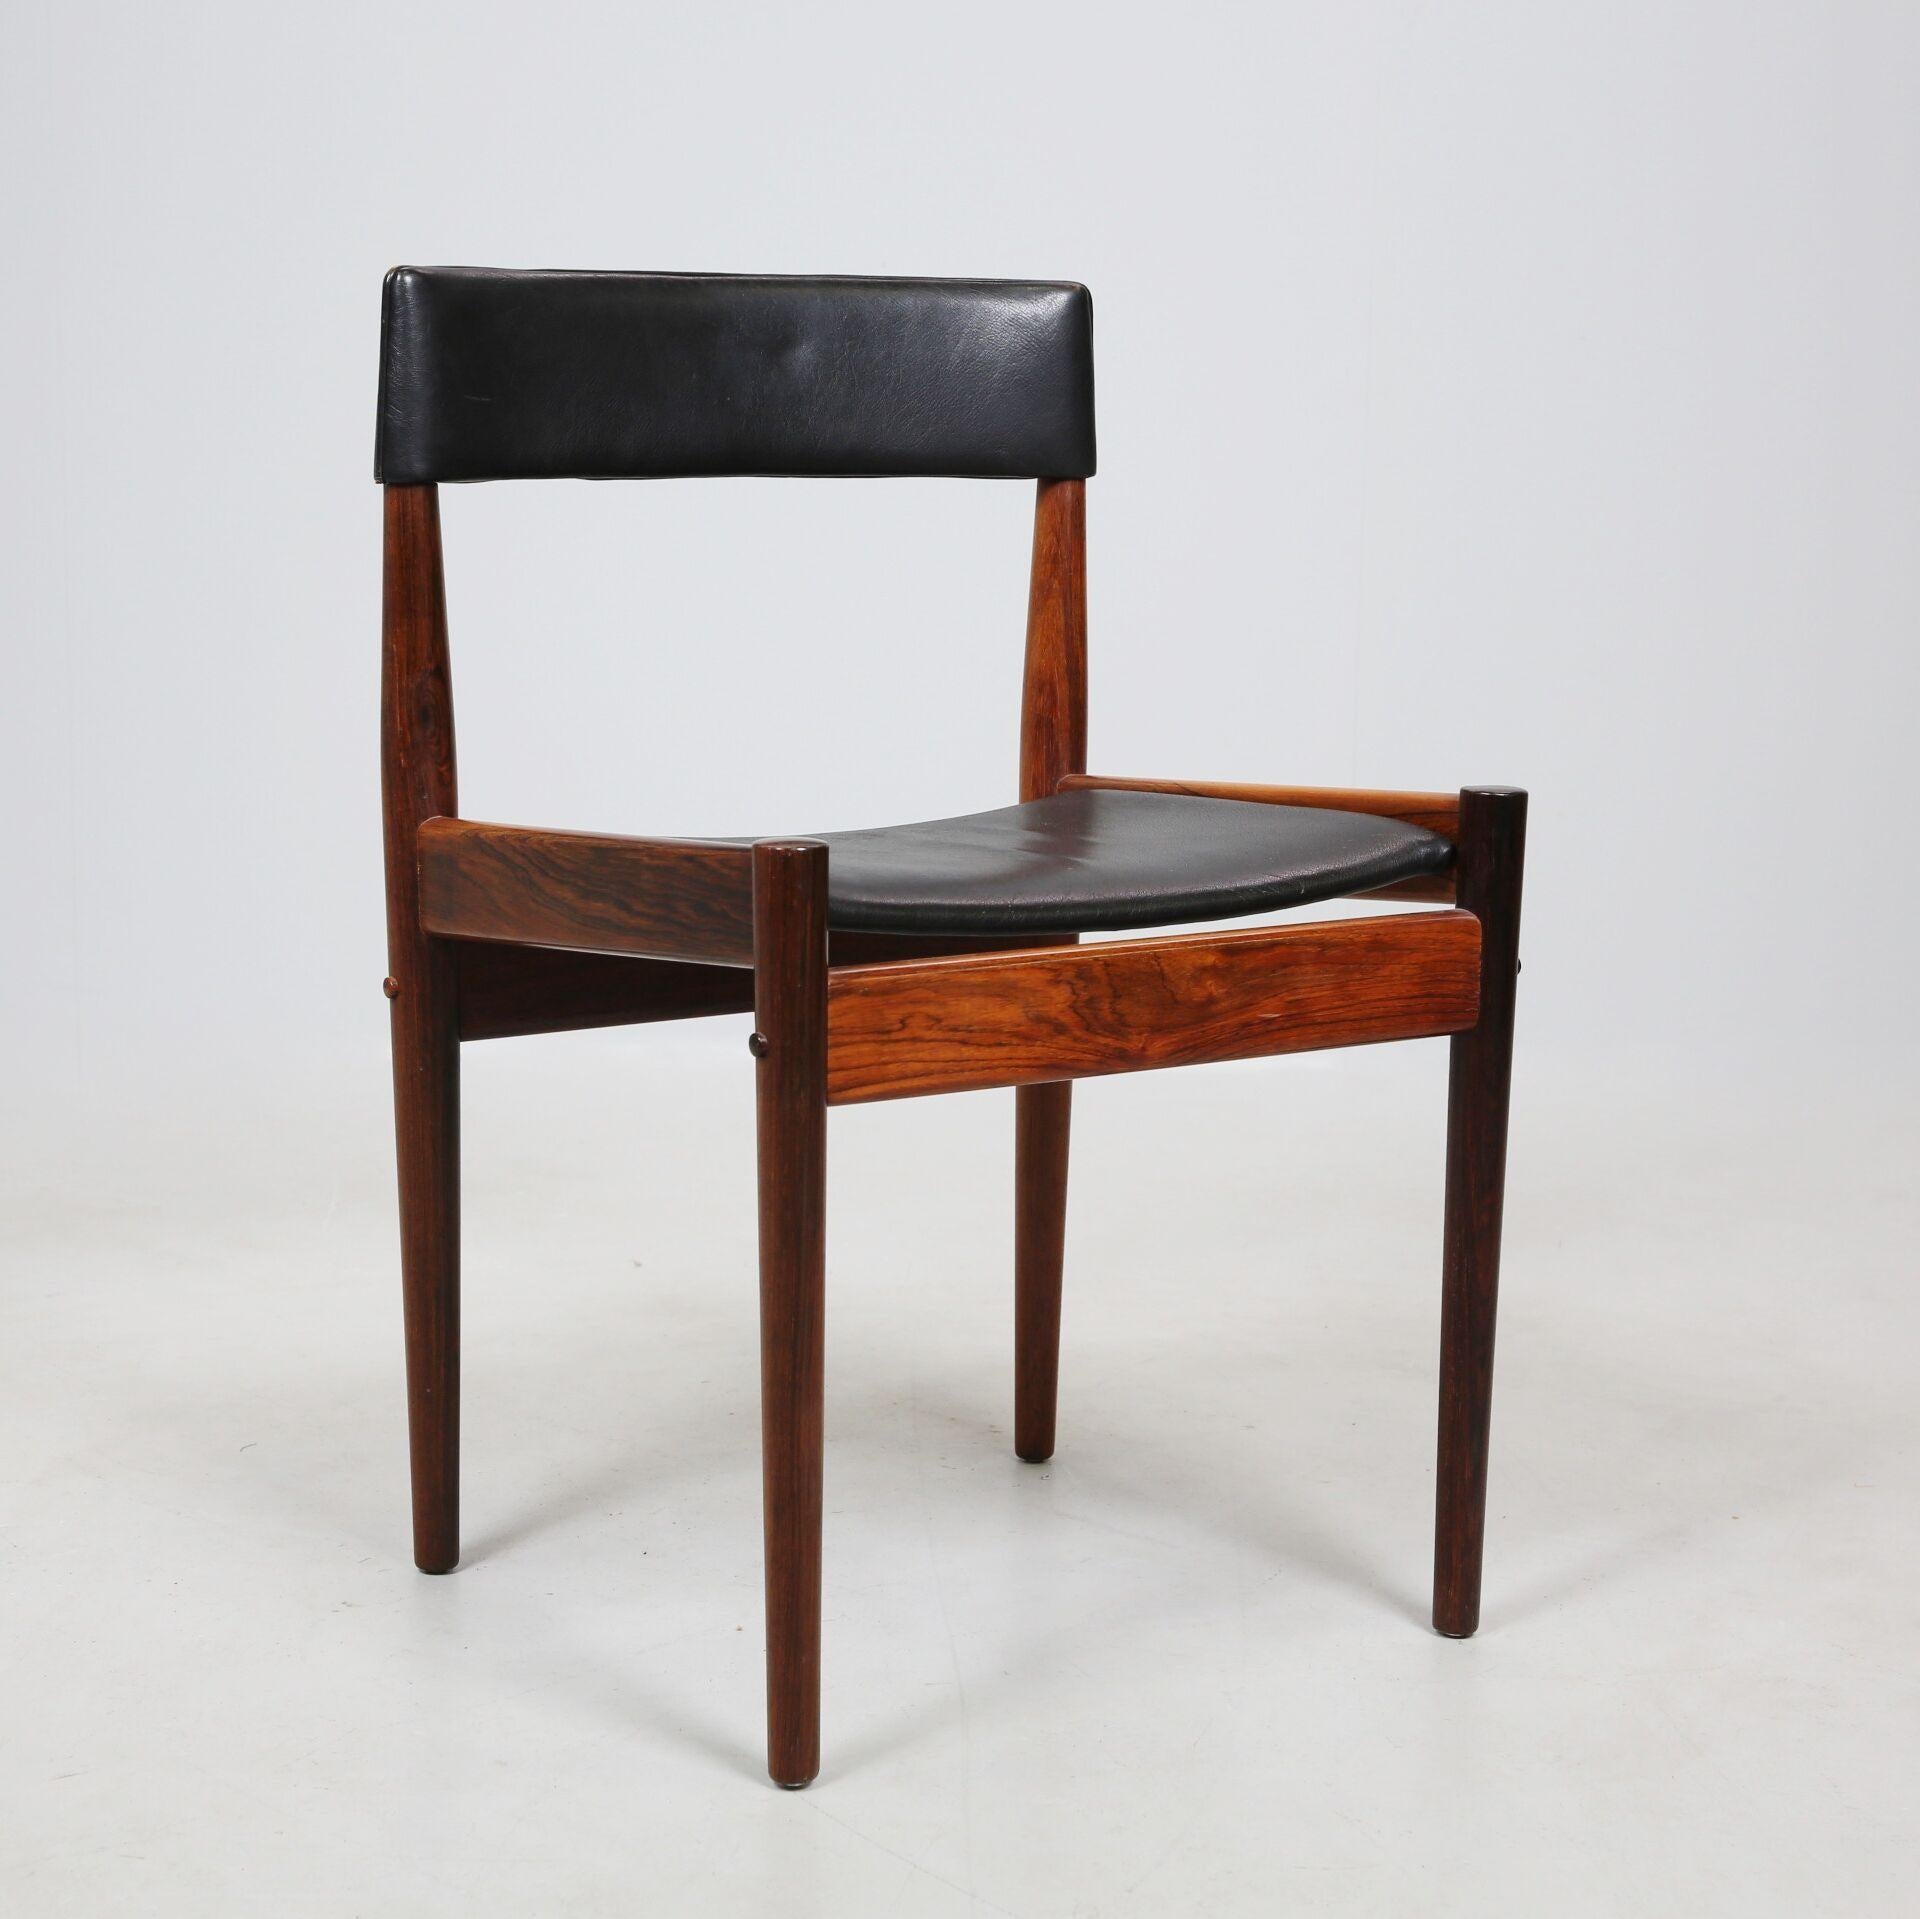 Elegant massive rosewood and black leather chairs by female designer Grete Jalk. Produced in the 60's by cabinetmaker Poul Jeppessens. We have 4 chairs available and a table. 8 more chairs without leather on the backrest so 12 chairs in total.